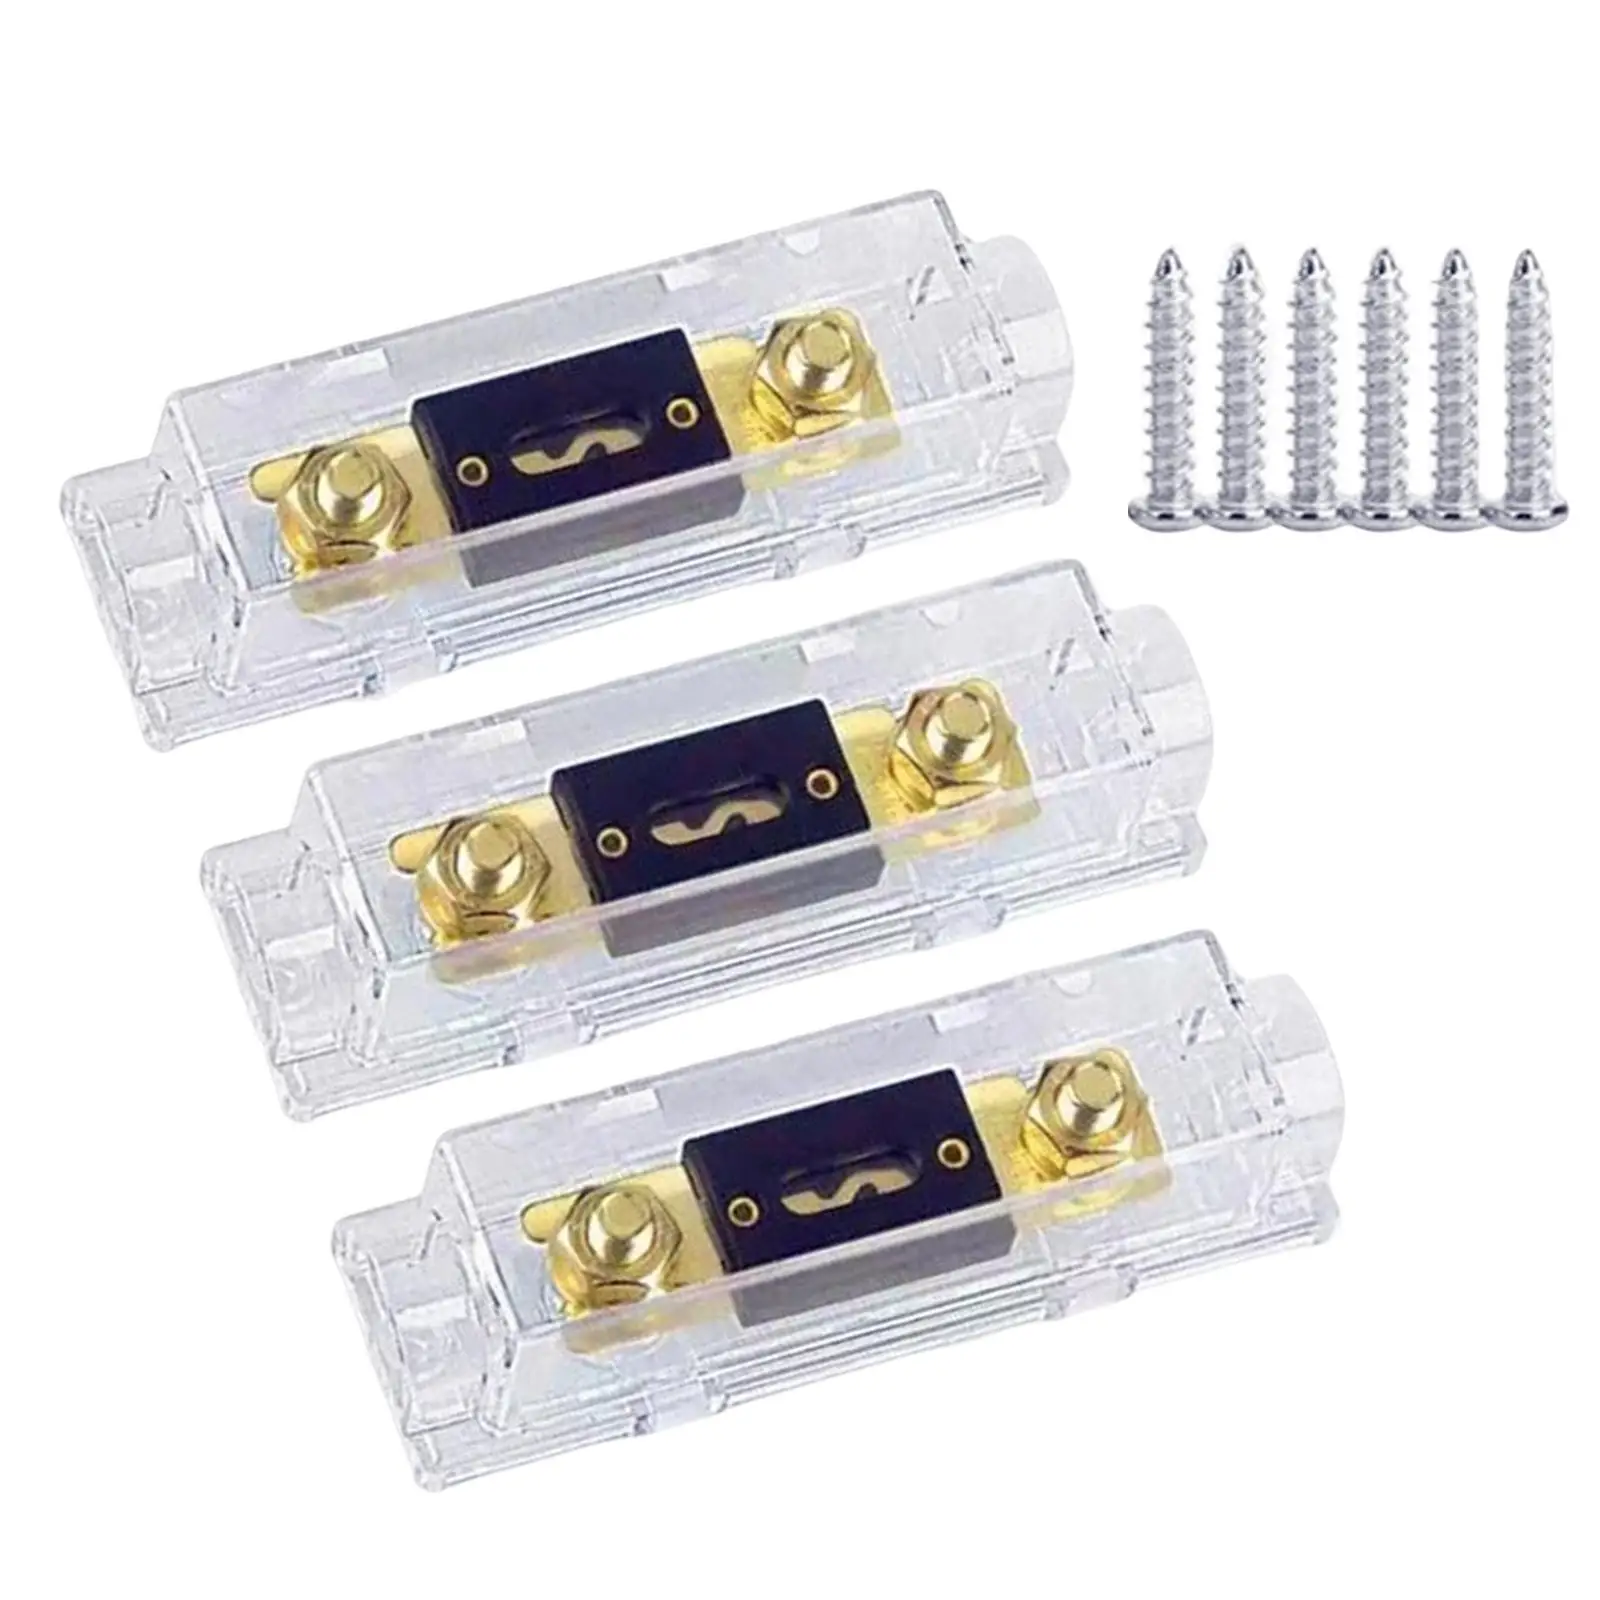 3x Car Fuse Holder Dampproof Circuit Protection Fuse Block for Marine